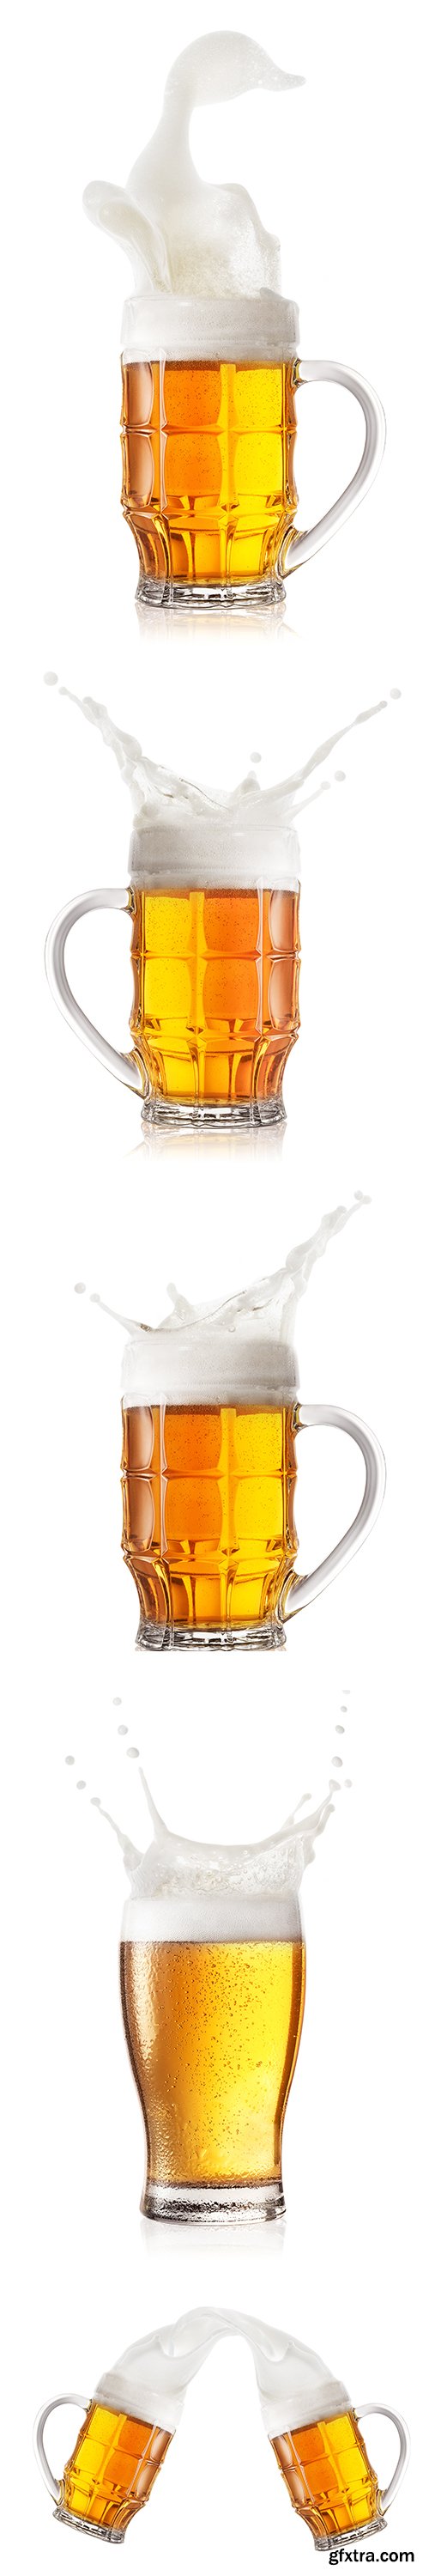 Splash Of Glass In Beer Isolated - 10xJPGs